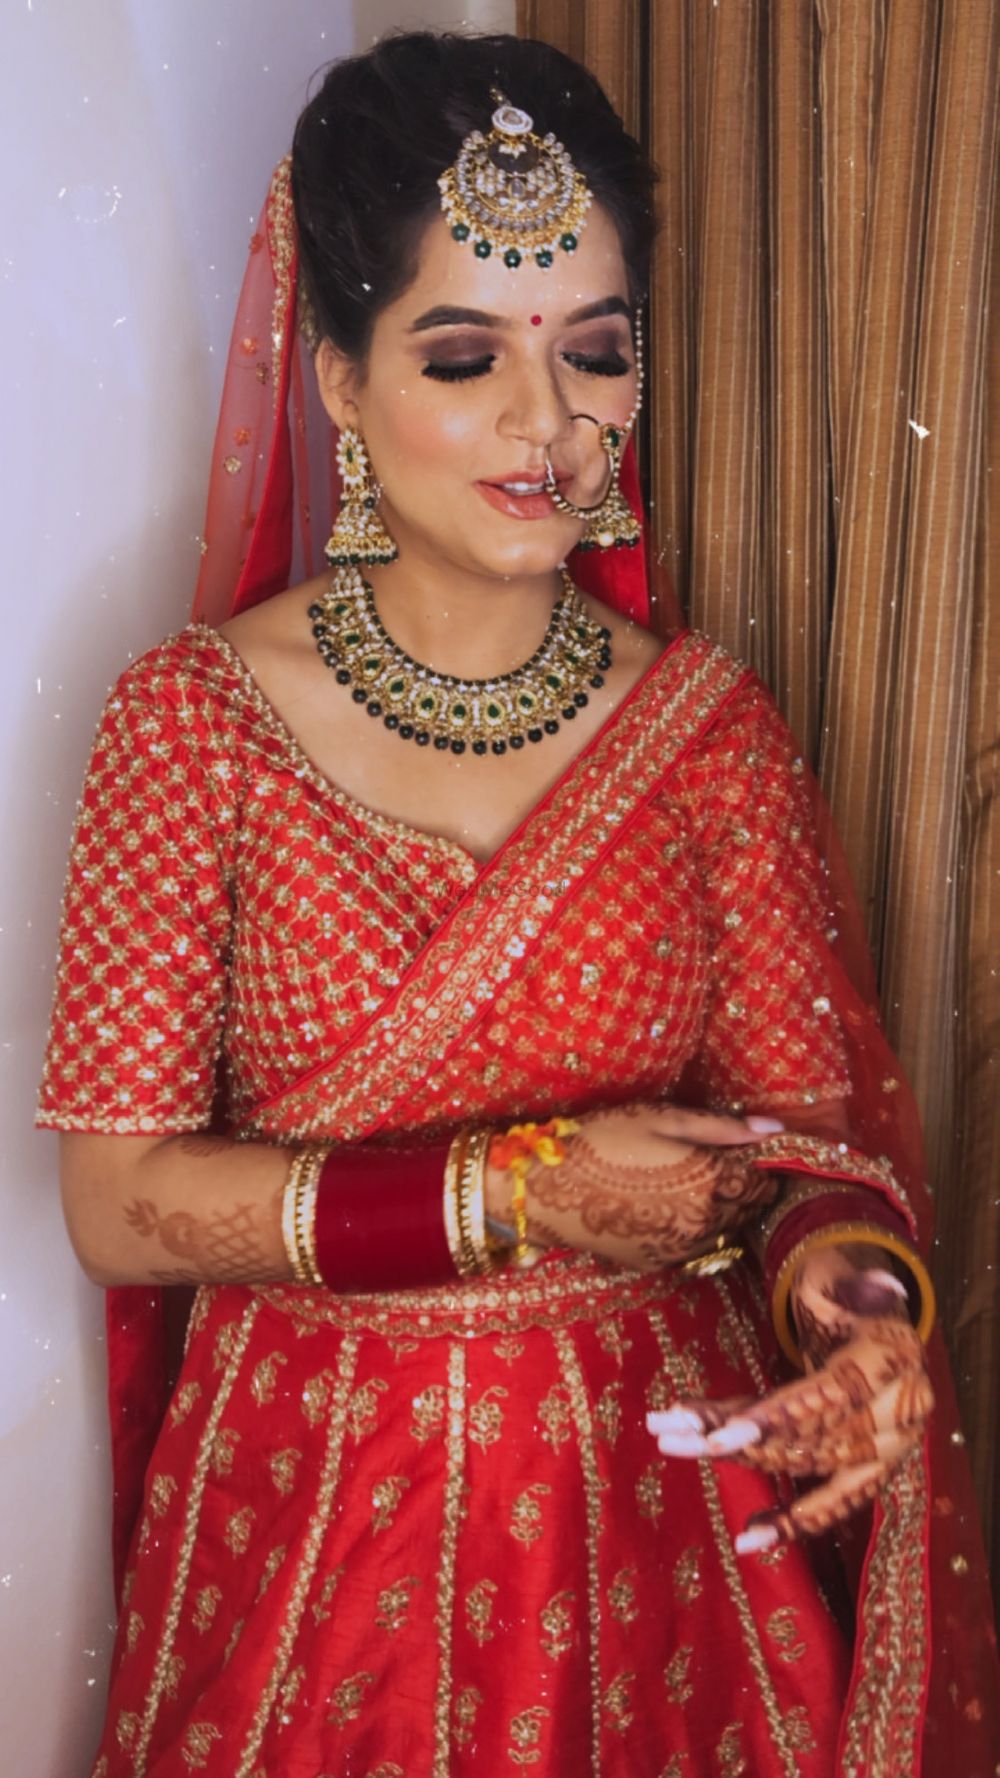 Photo From Brides - By Face Tales by Akrity Malhotra